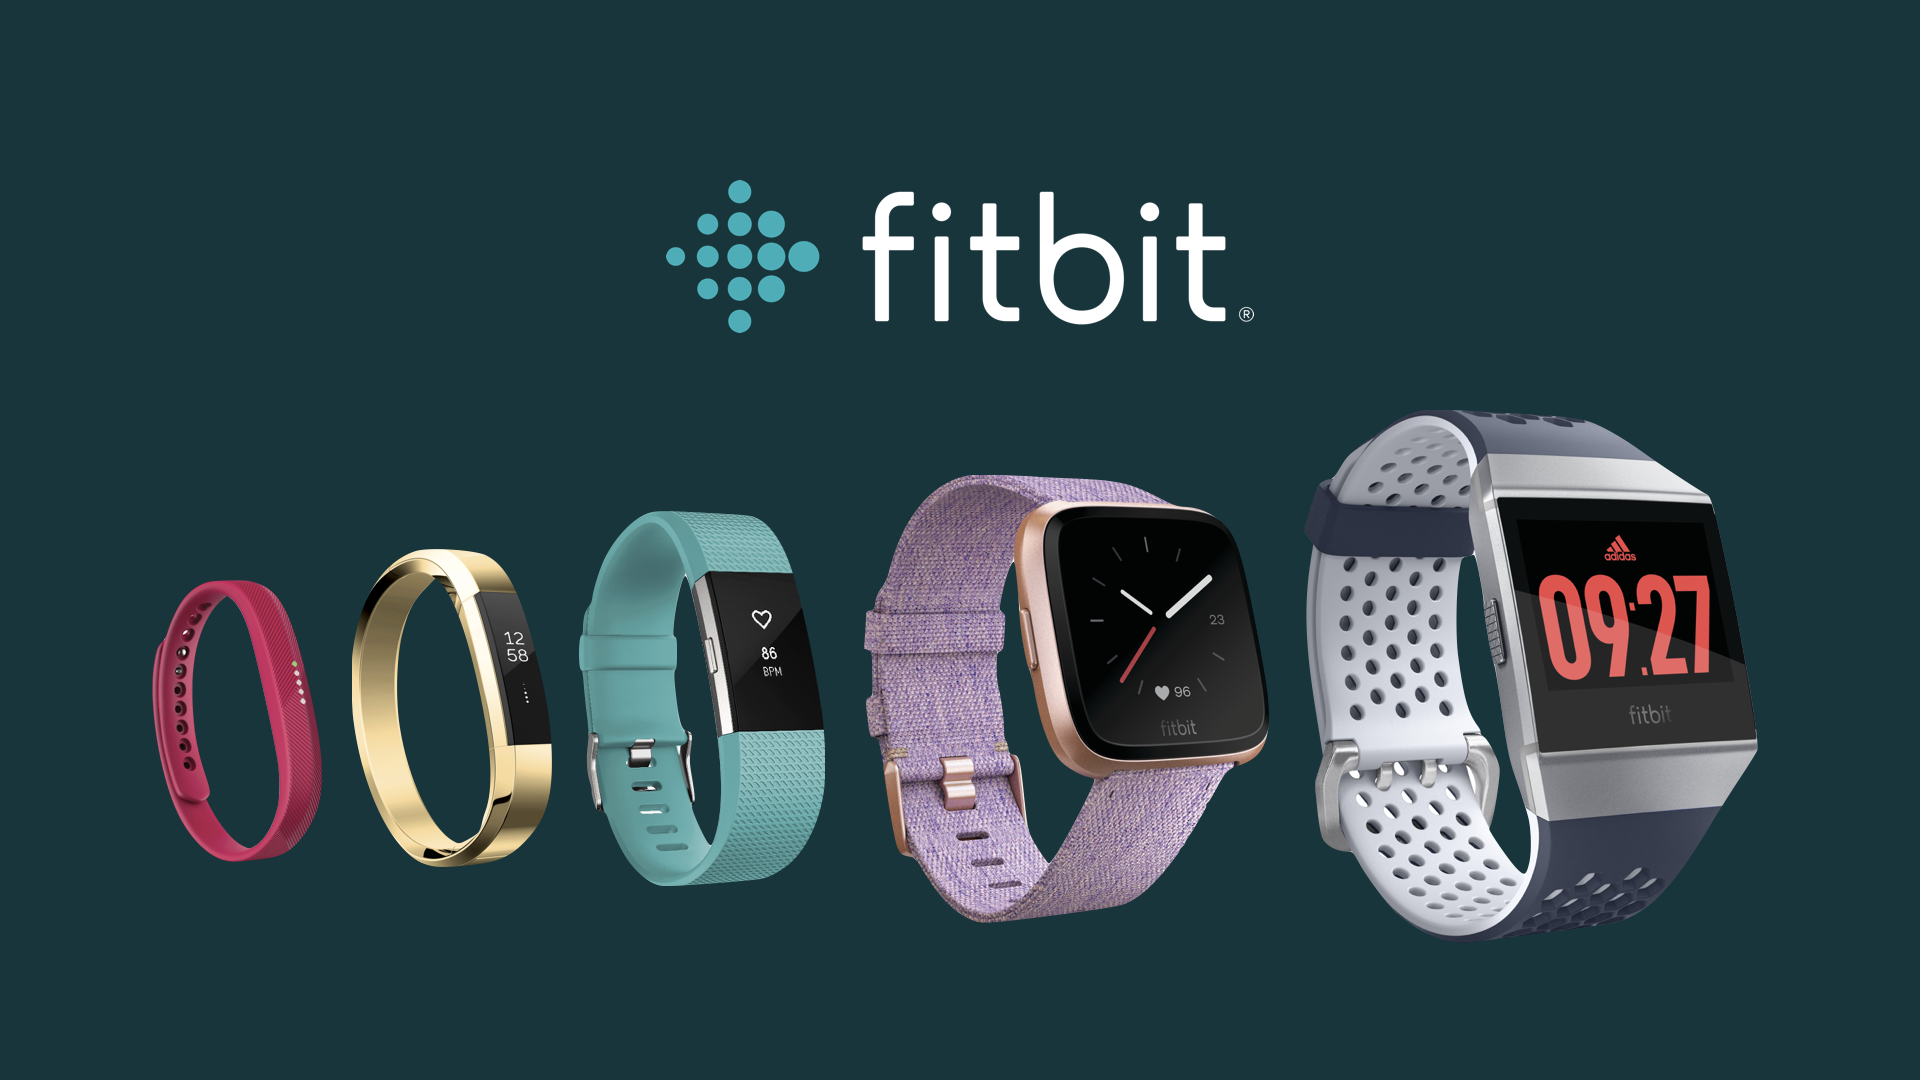 Slide with images of the Fitbit smart watches and activity trackers